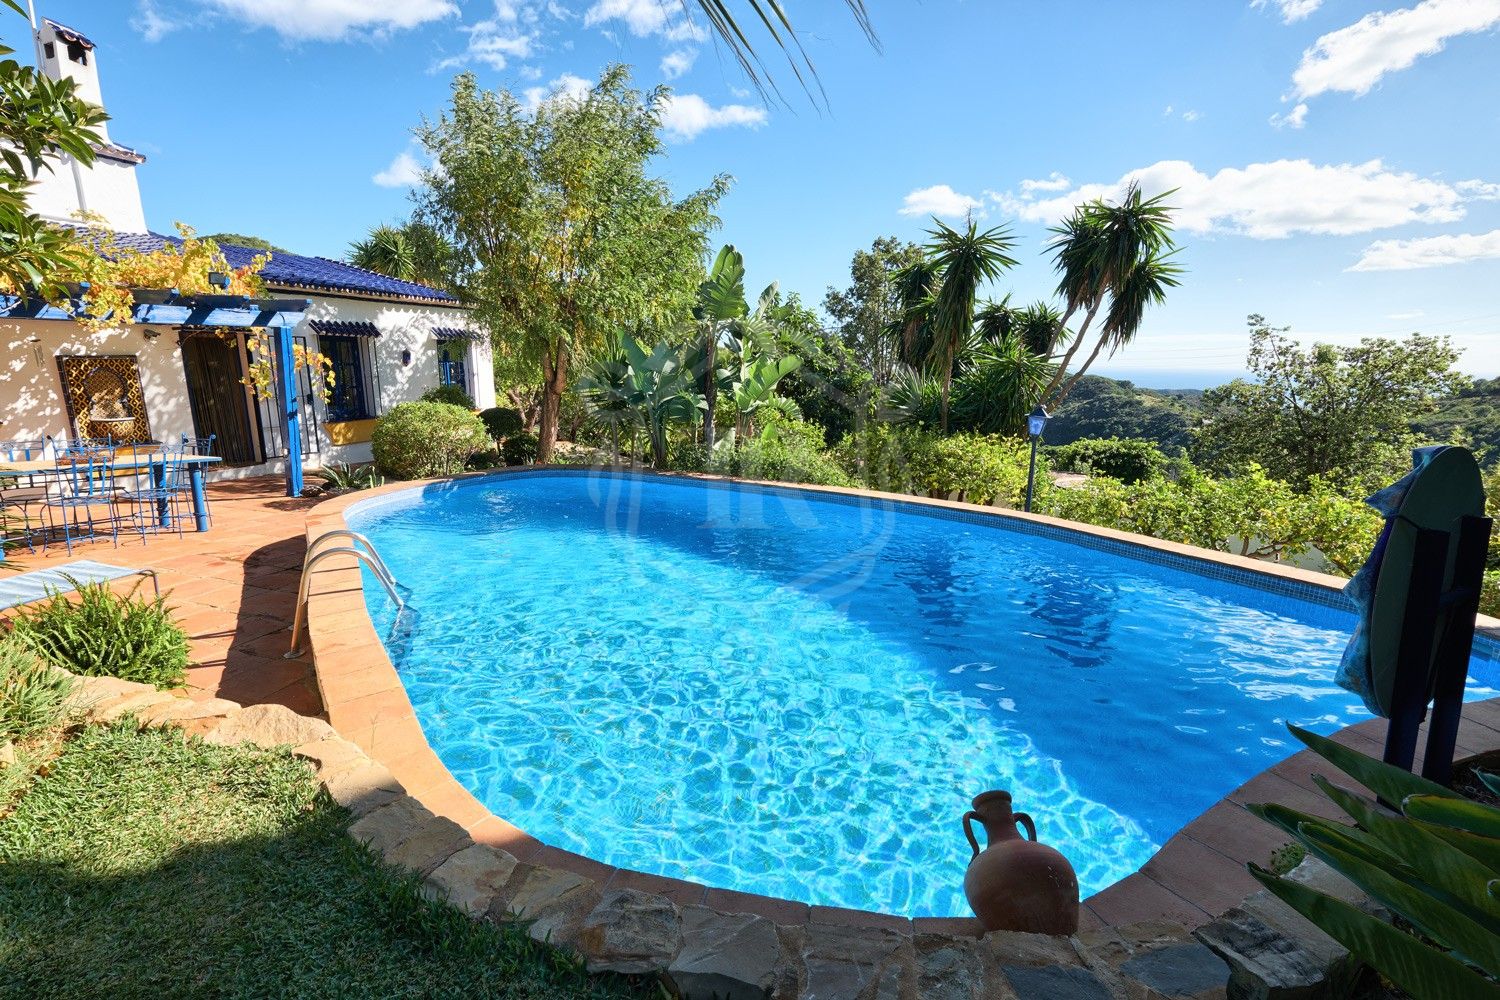 CHARMING FINCA IN THE MOUNTAINS OF ESTEPONA WITH GOOD ACCESS TO SERVICES AND GREAT PRIVACY